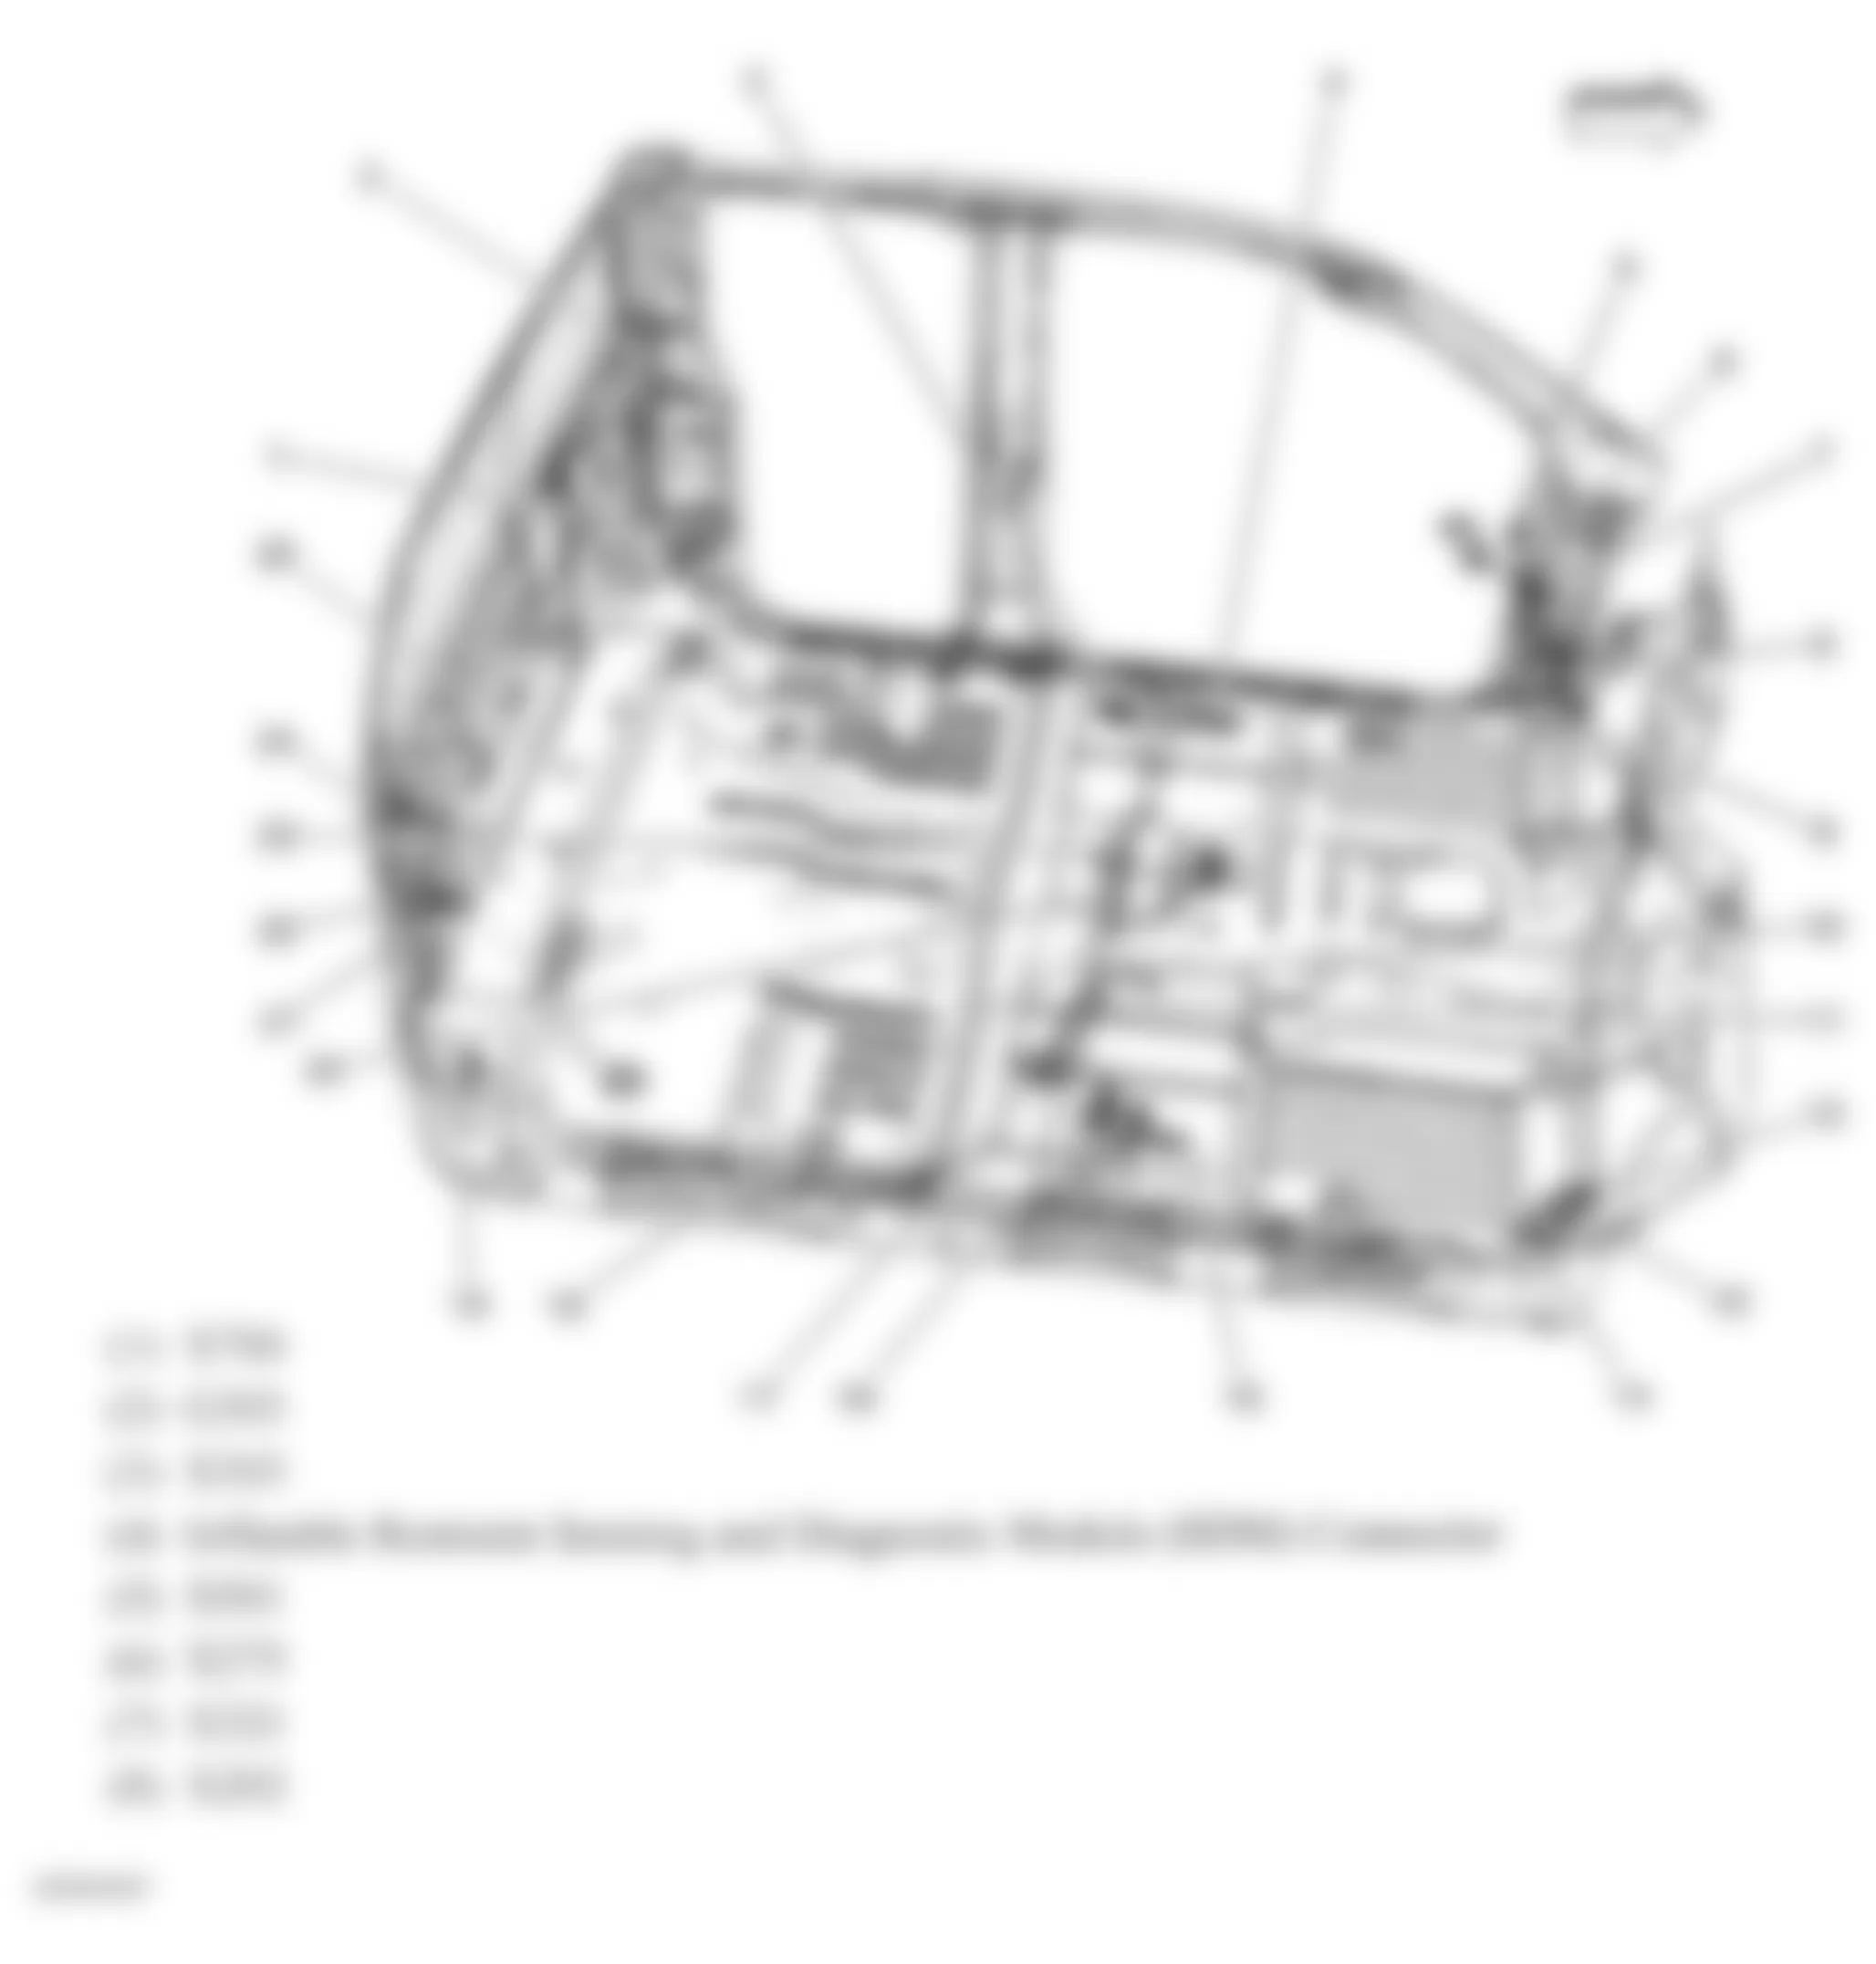 GMC Sierra 1500 2010 - Component Locations -  Passenger Compartment (Extended Cab) (1 Of 2)